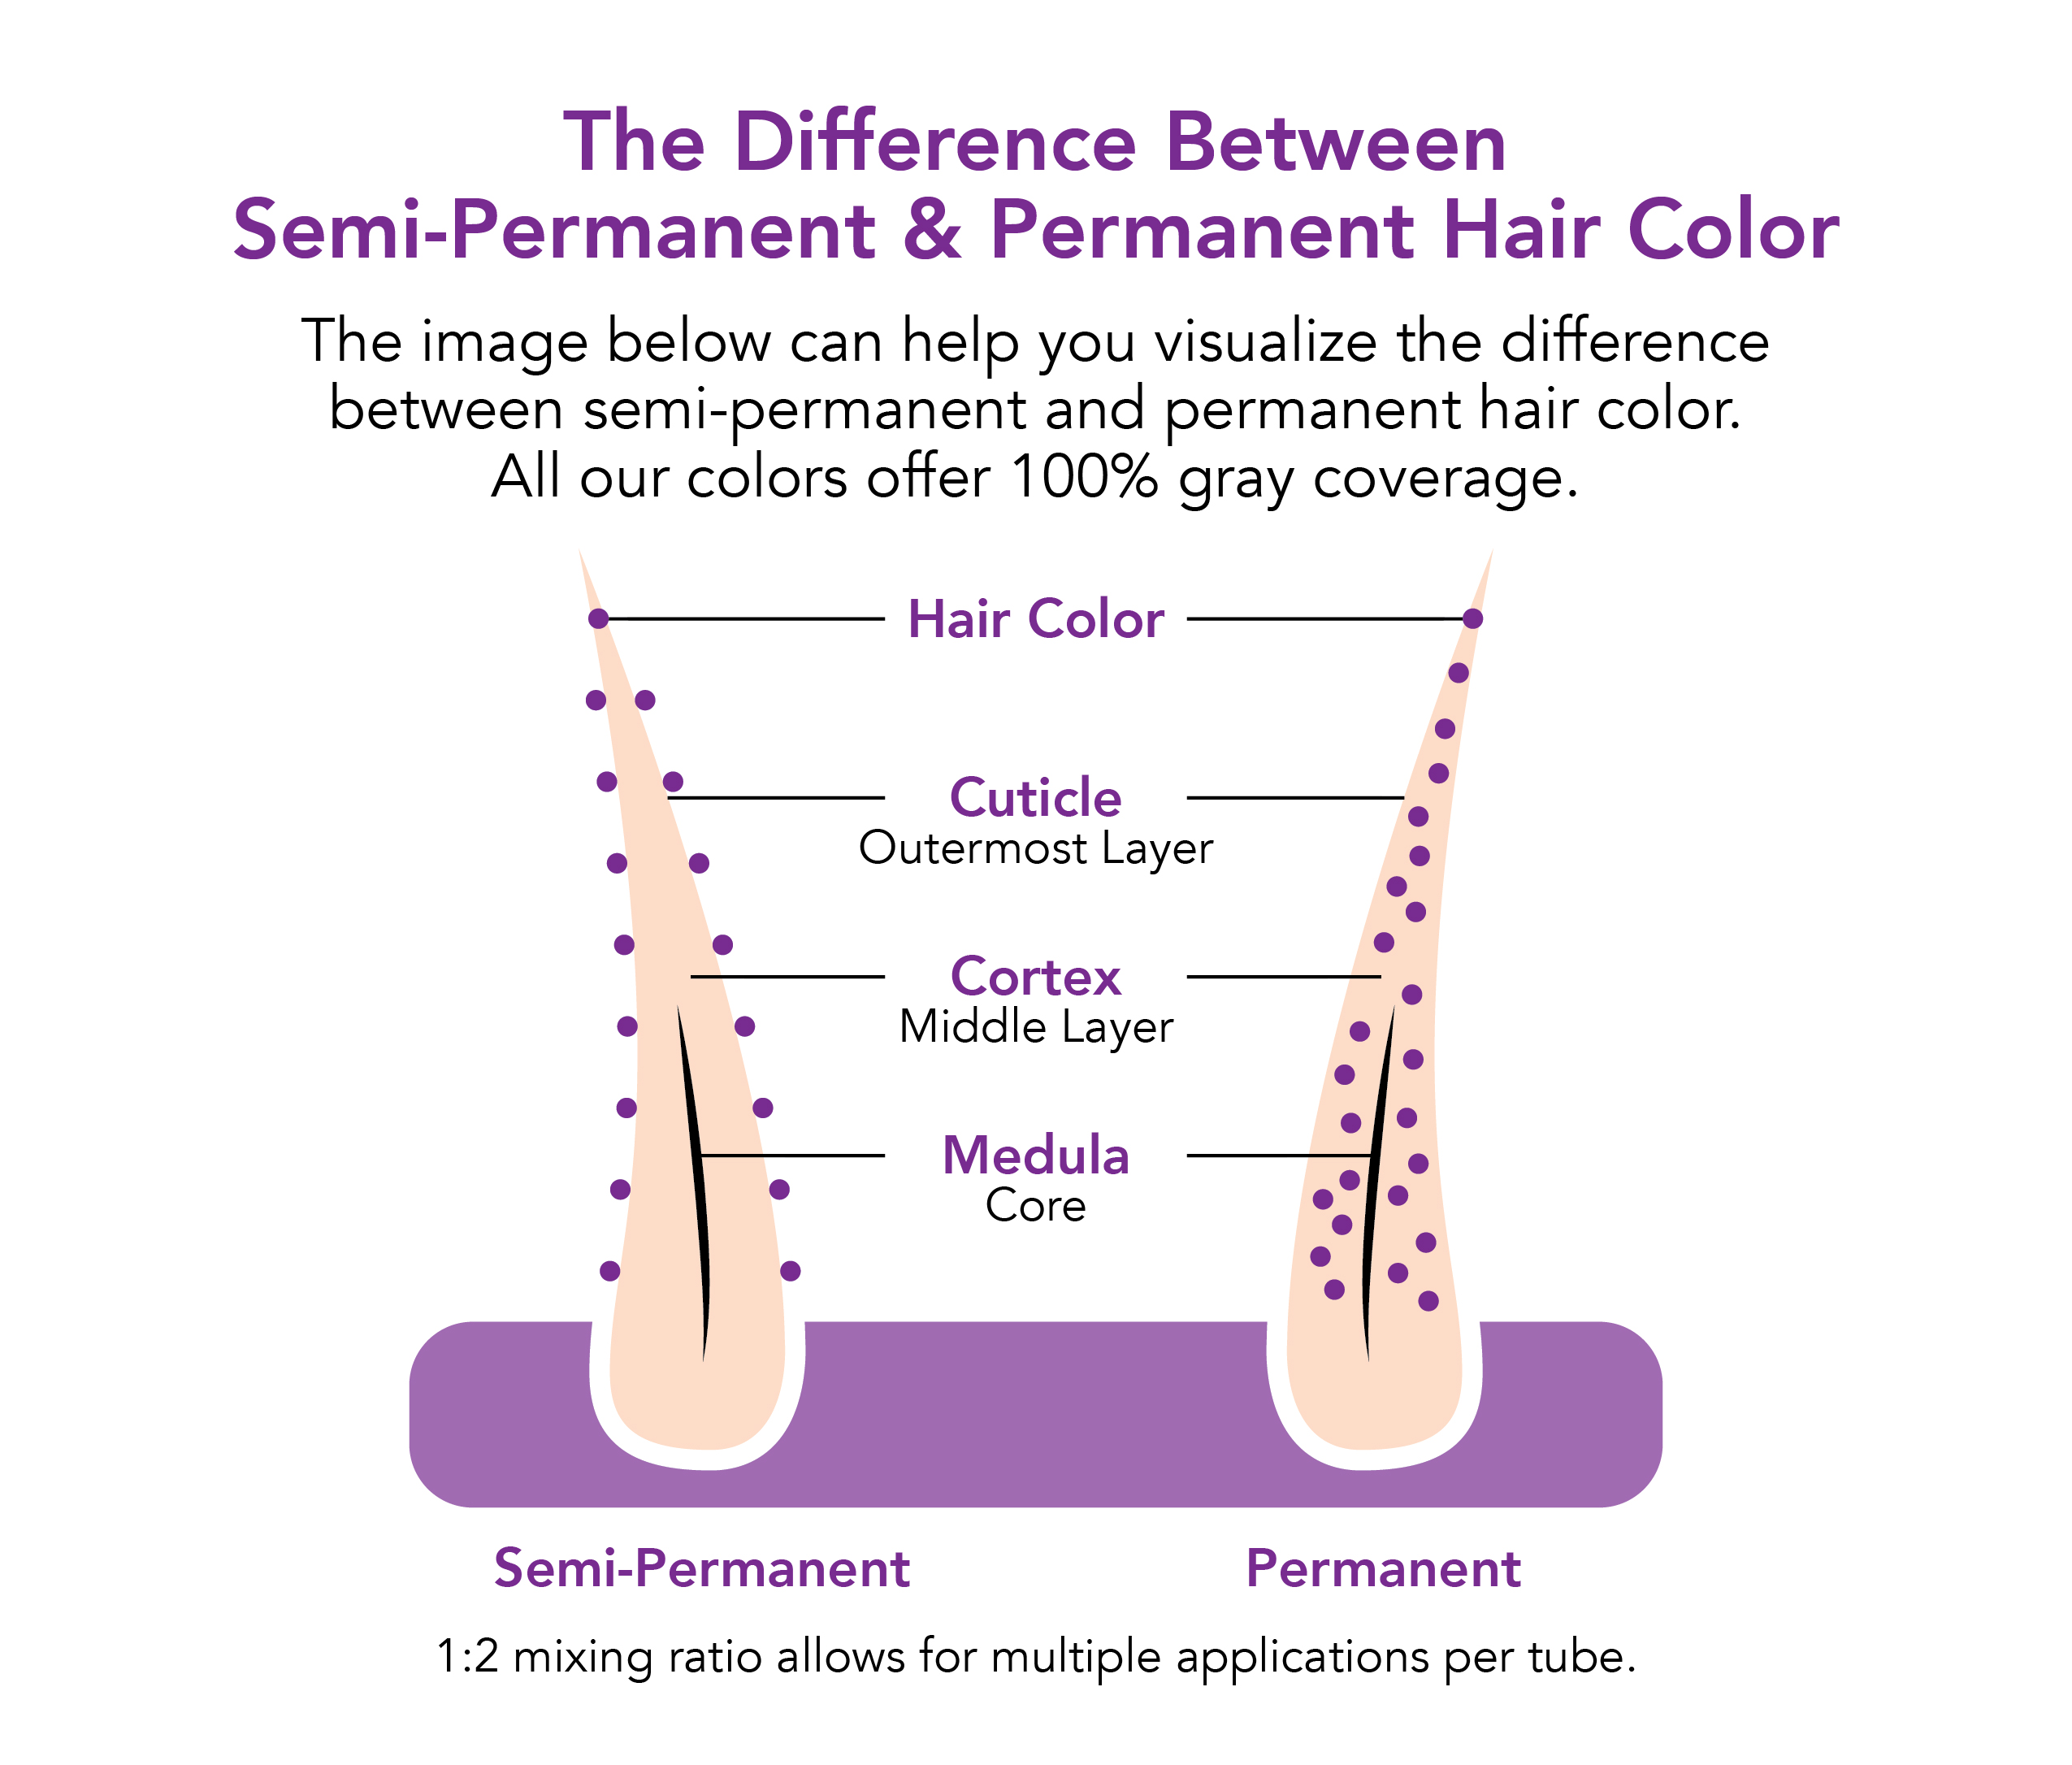 Permanent vs. Semi-Permanent Hair Color: What is the Difference